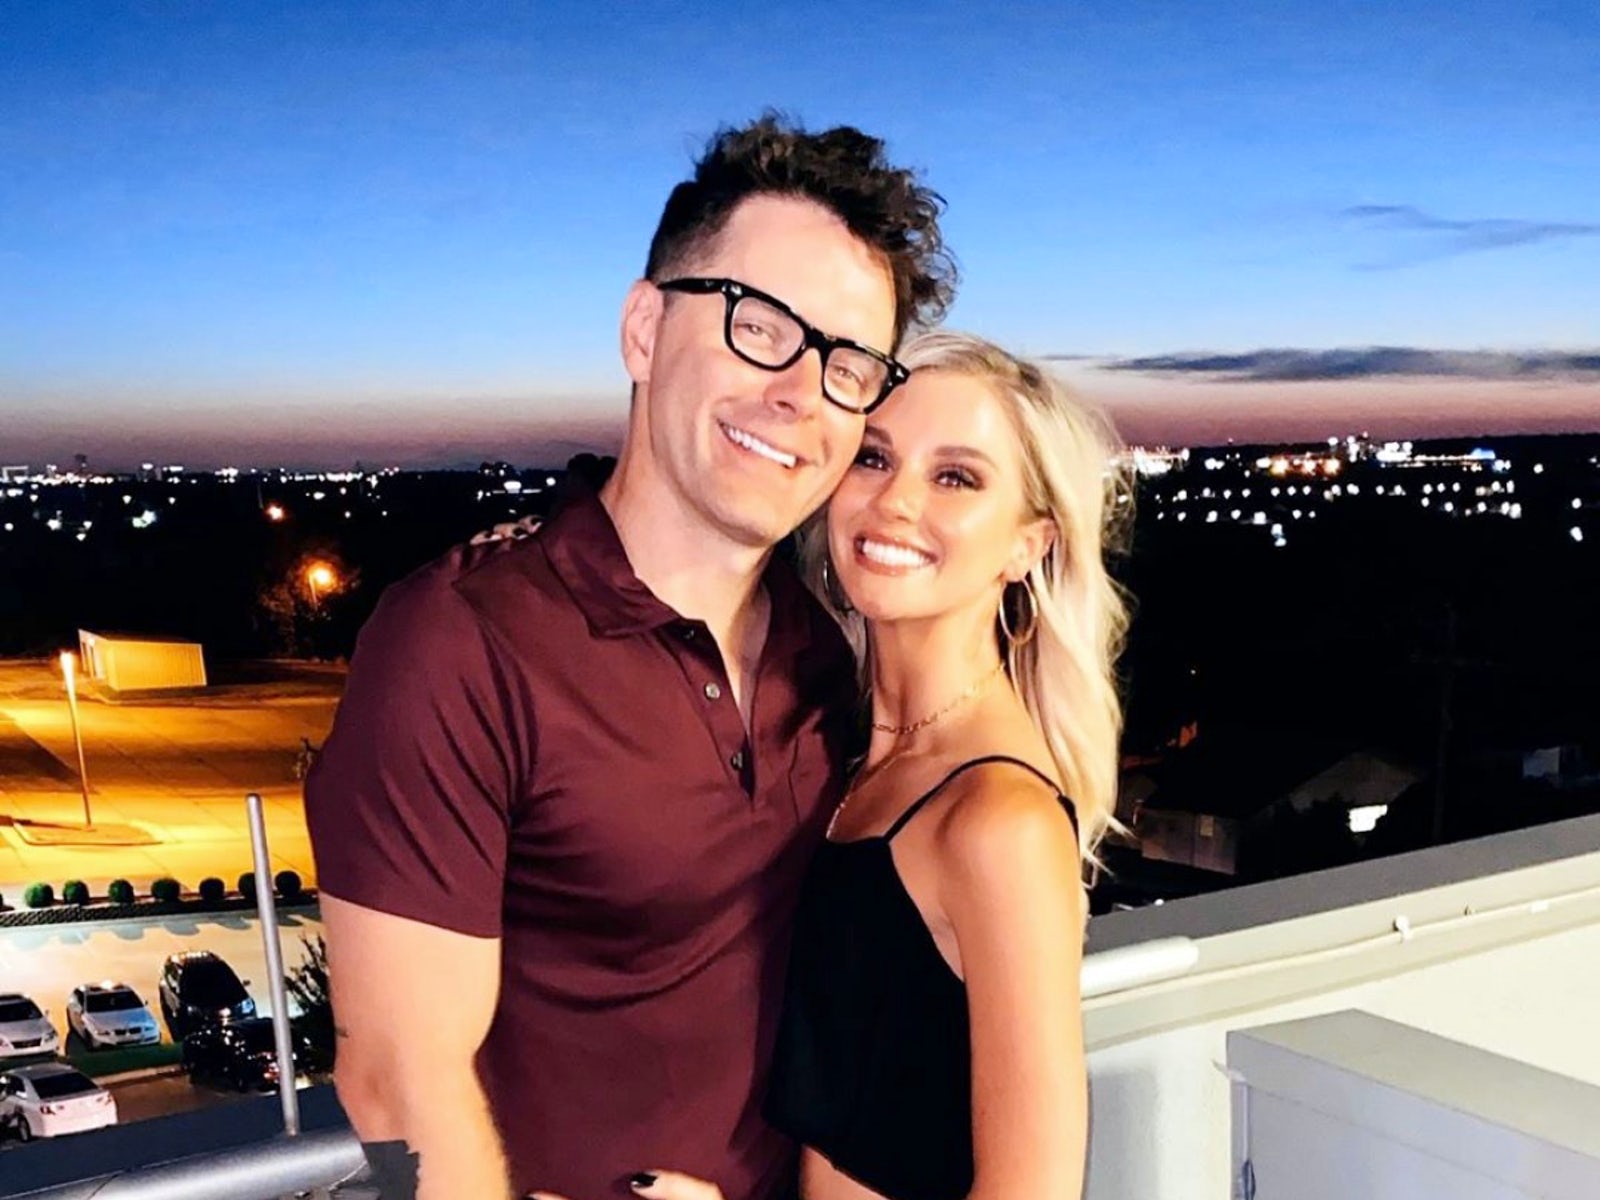 Bobby Bones engaged to girlfriend Caitlin Parker - Reality TV World